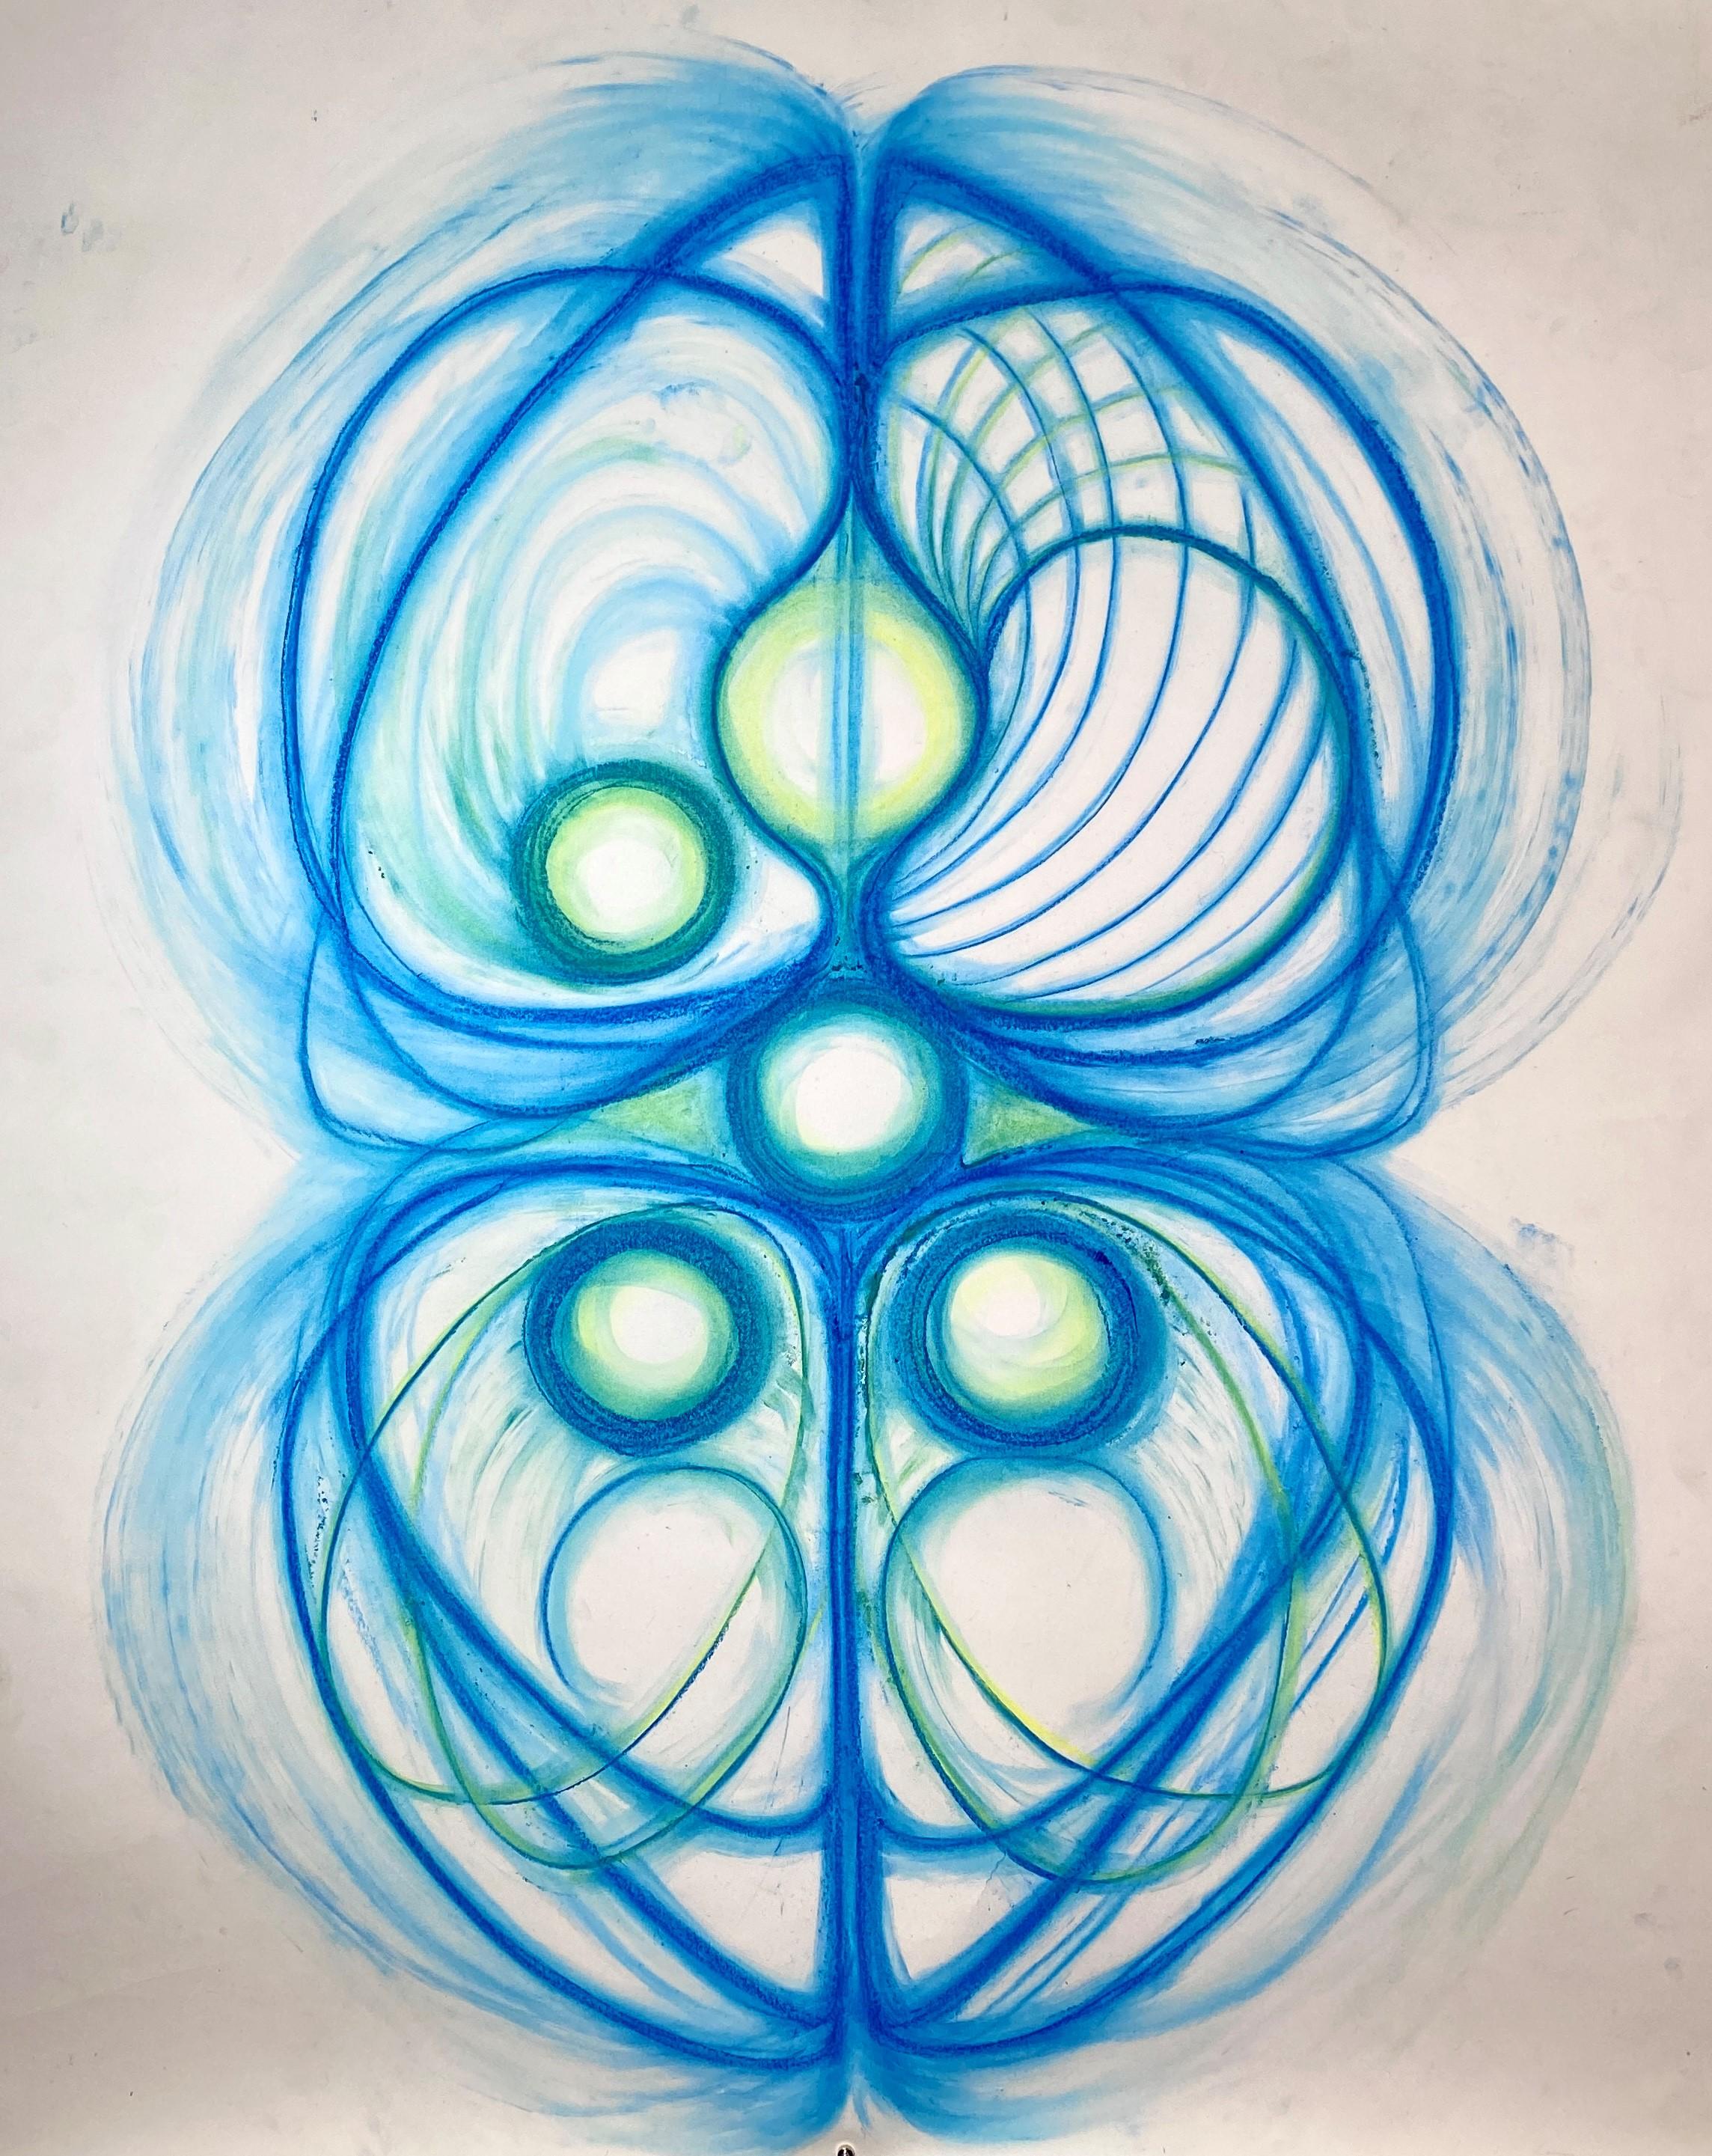 An artwork made from swirl patterns of blue, green and yellow.